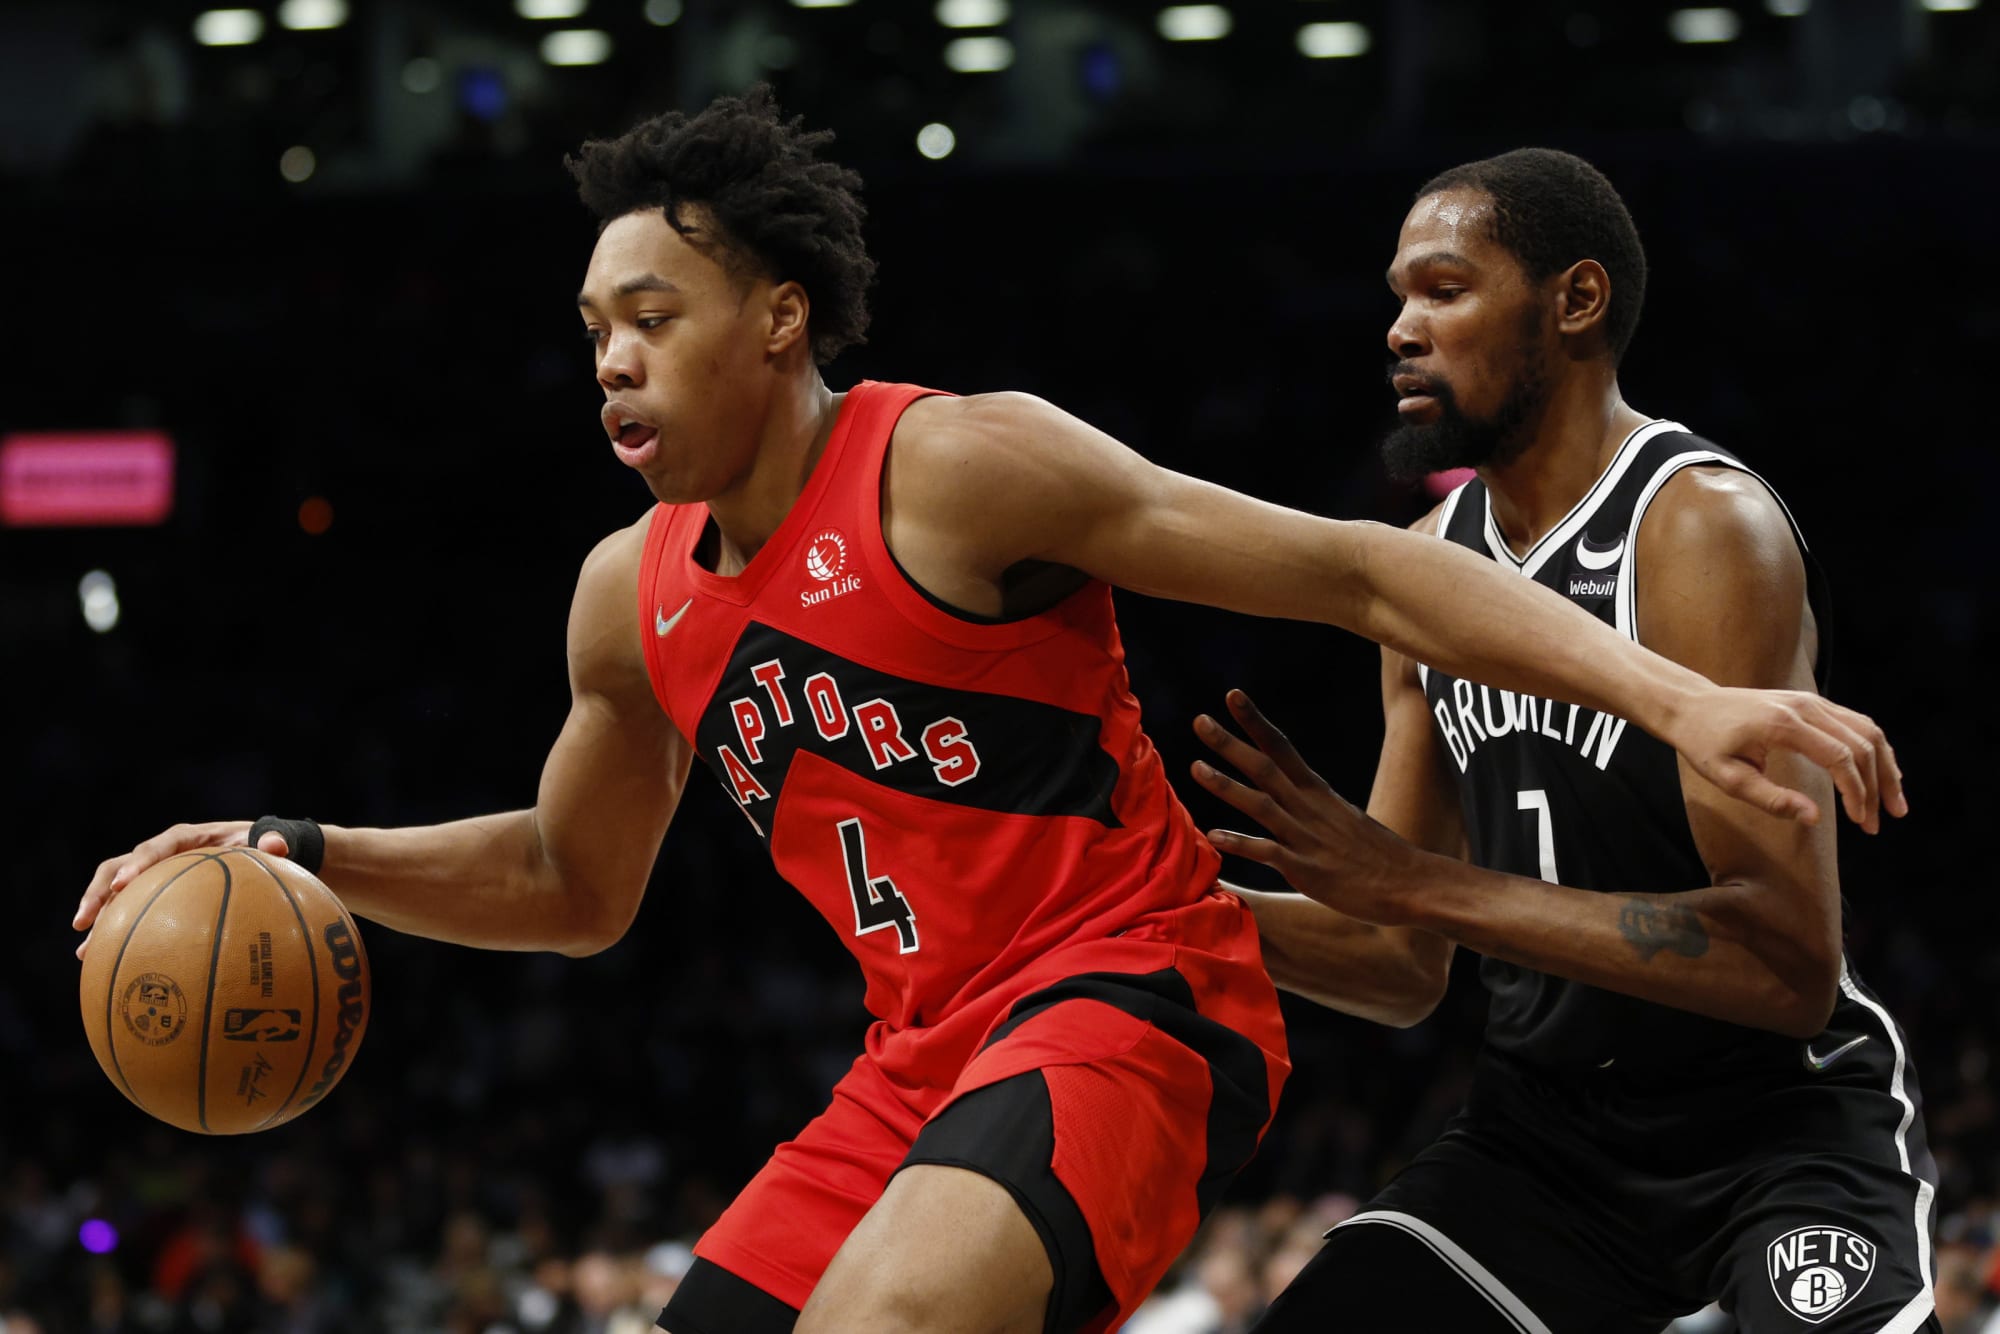 Previewing key Raptors matchups in the second half of the season